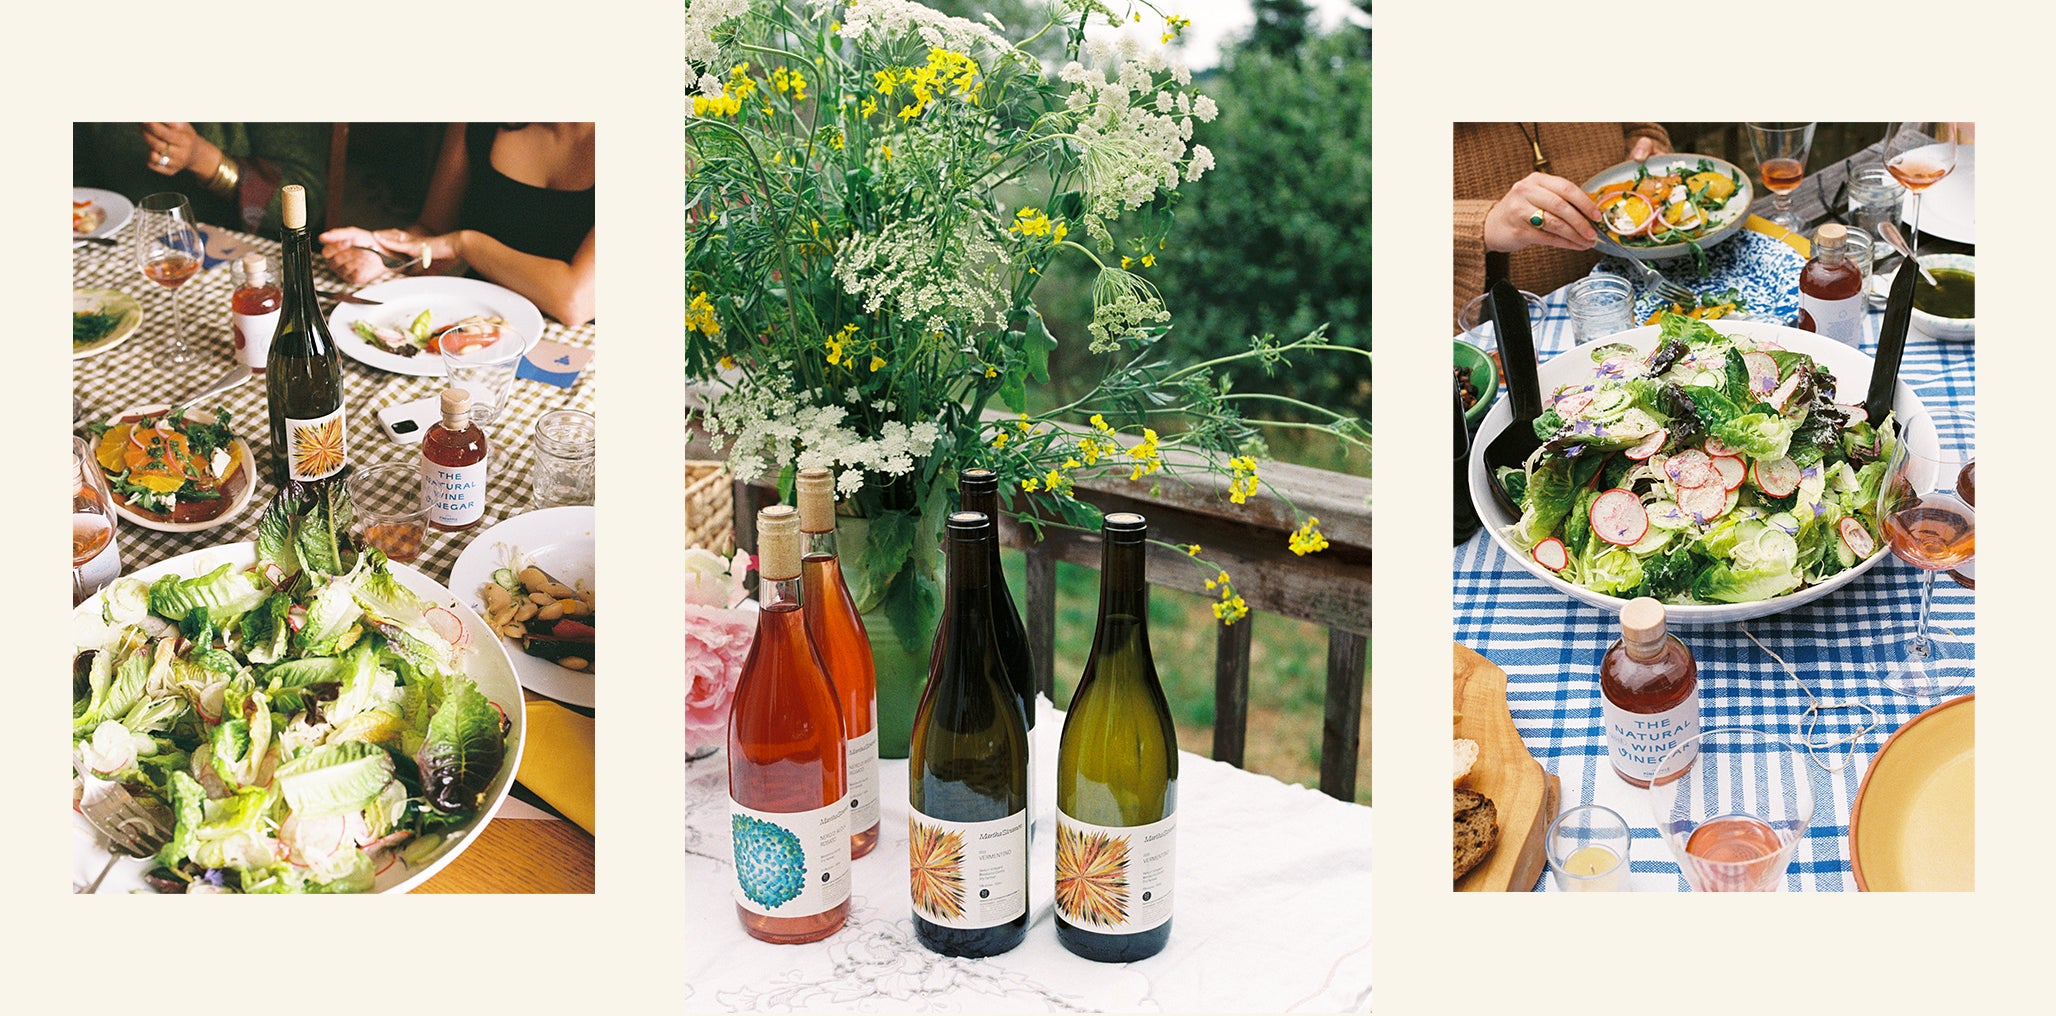 The Natural Wine Vinegar Launch Lunch